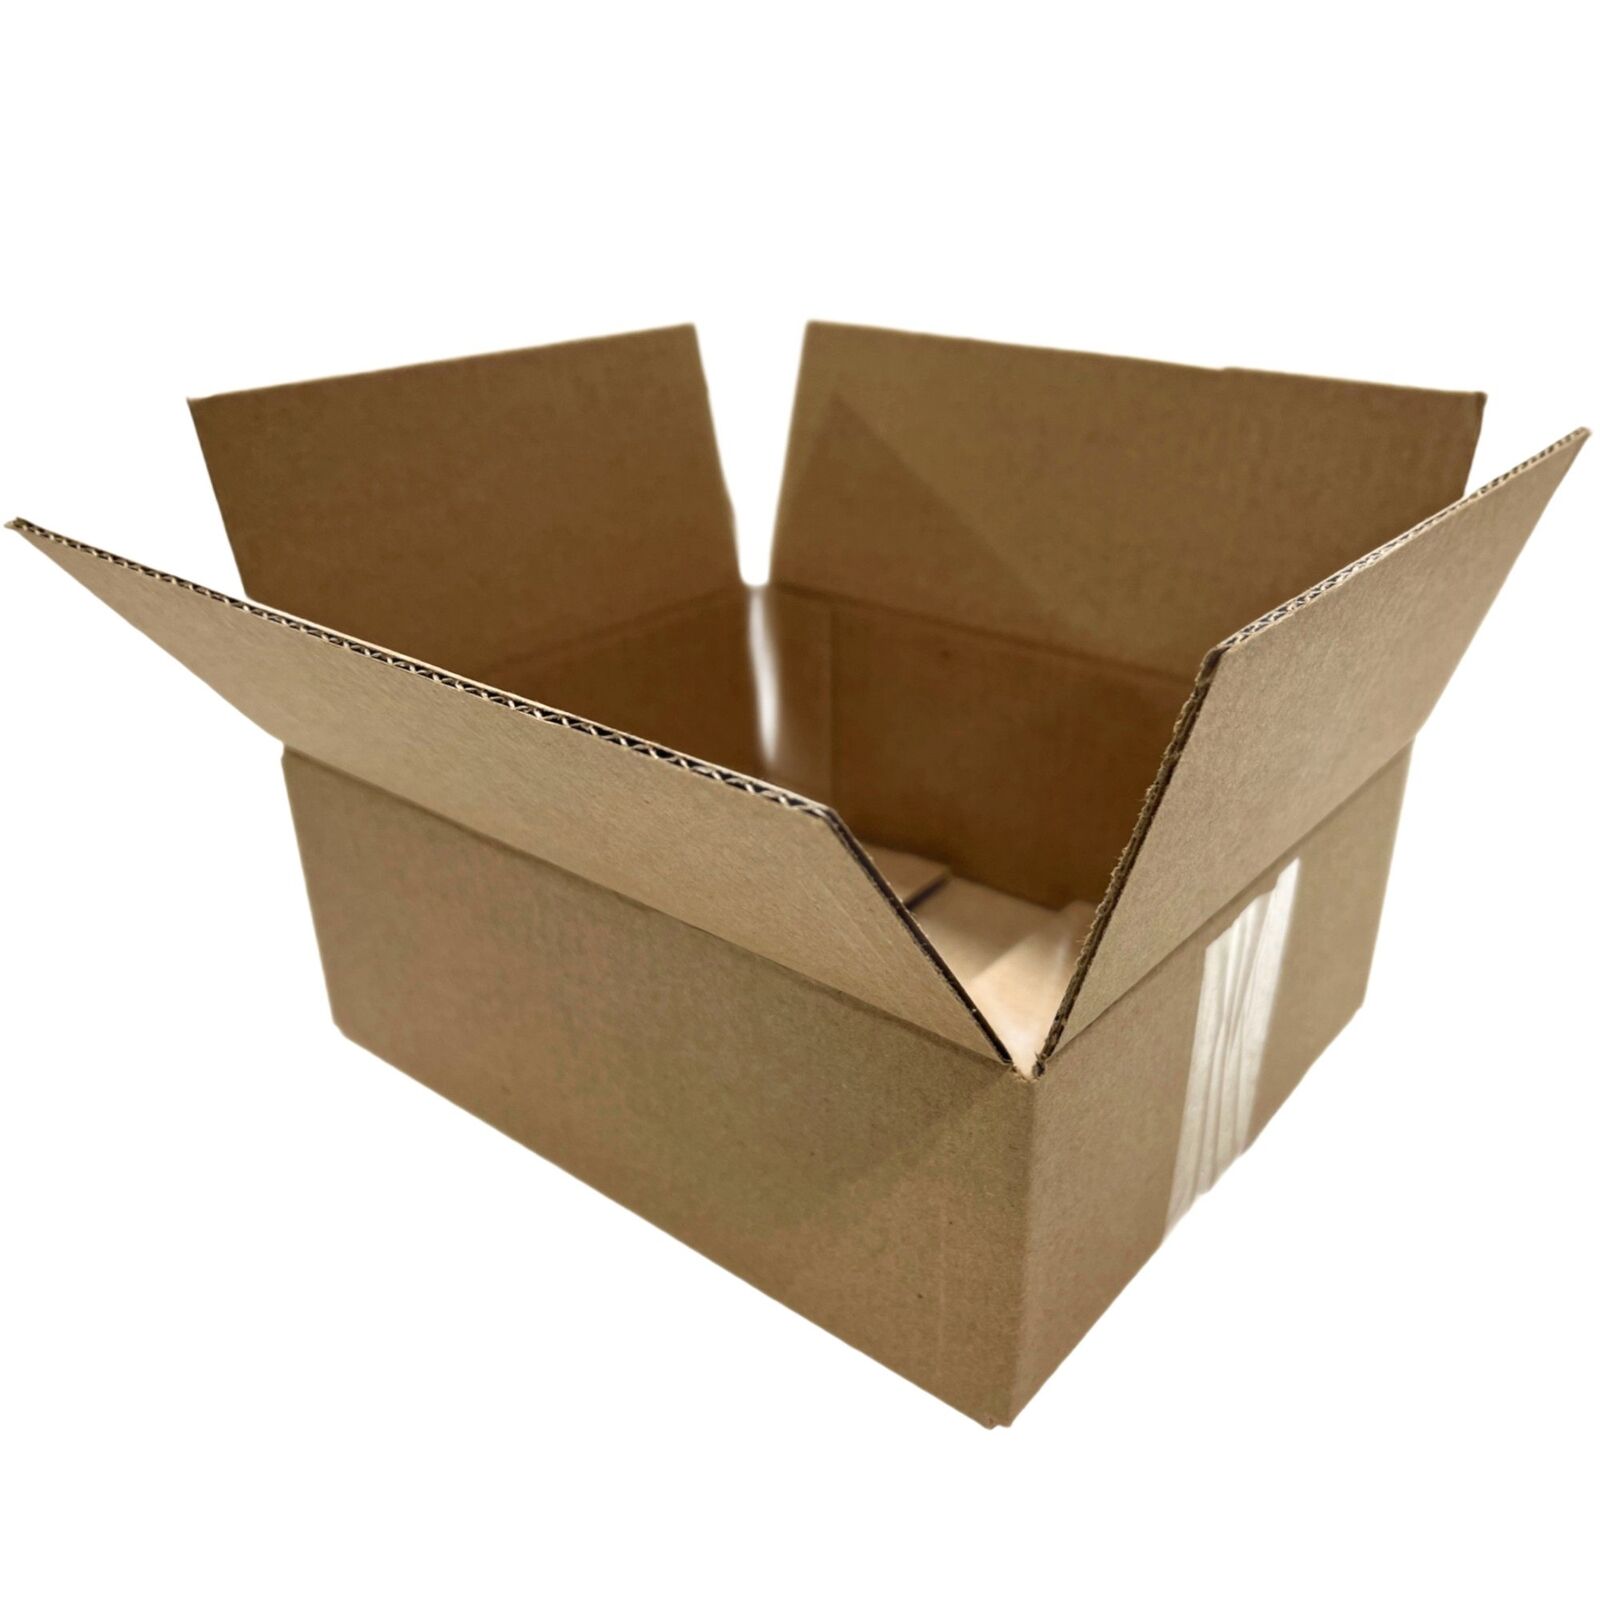 100 7x5x5 Cardboard Paper Boxes Mailing Packing Shipping Box Corrugated Carton